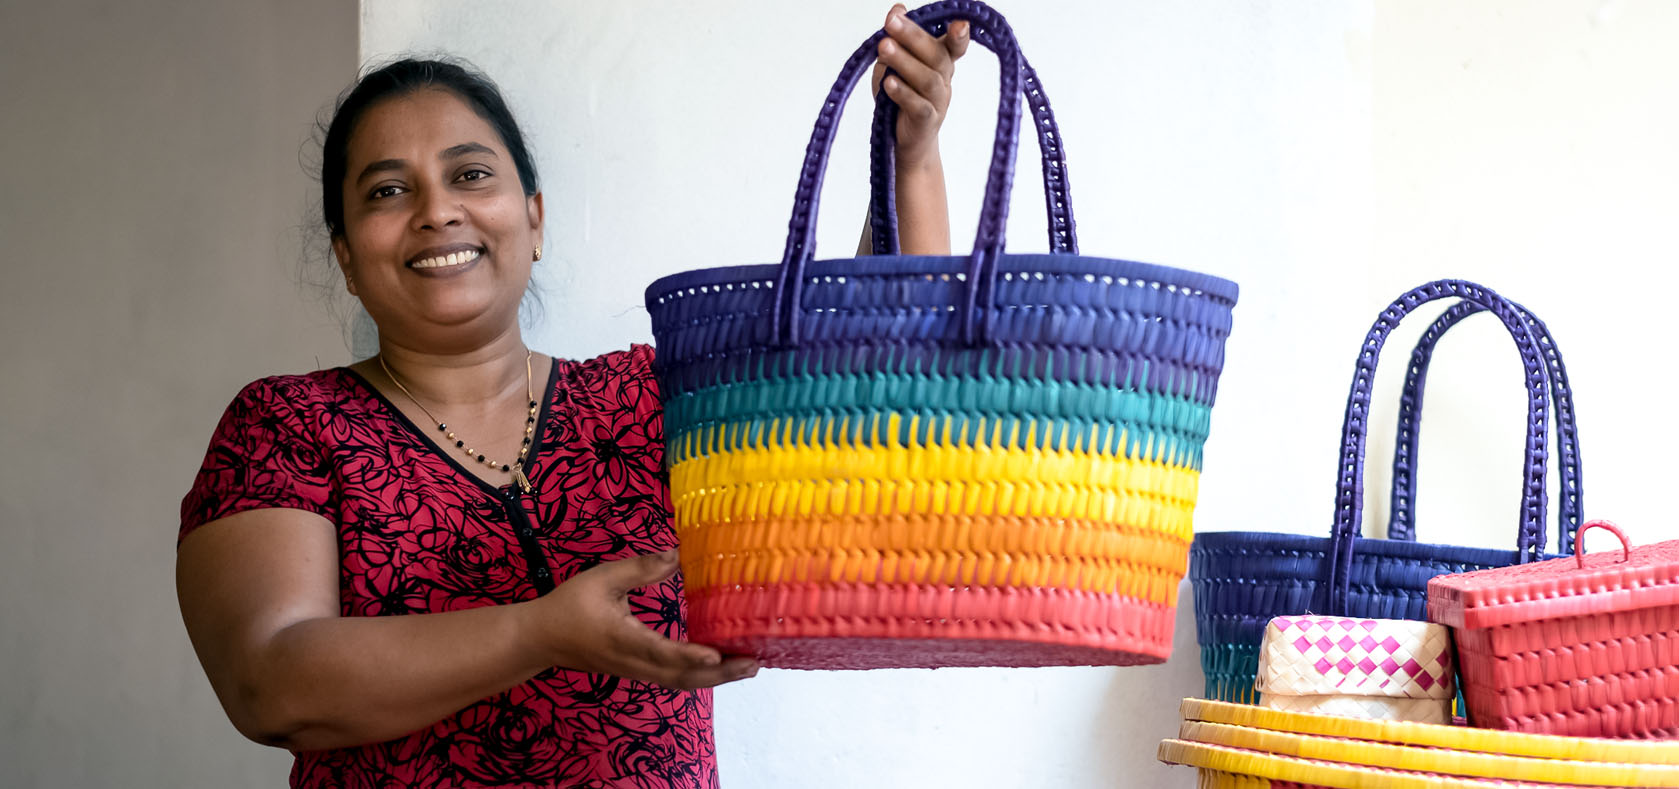 Lucia began palm-weaving in 2014 and also trains others in the craft. Photo: UN Women Sri Lanka/Ruvin De Silva